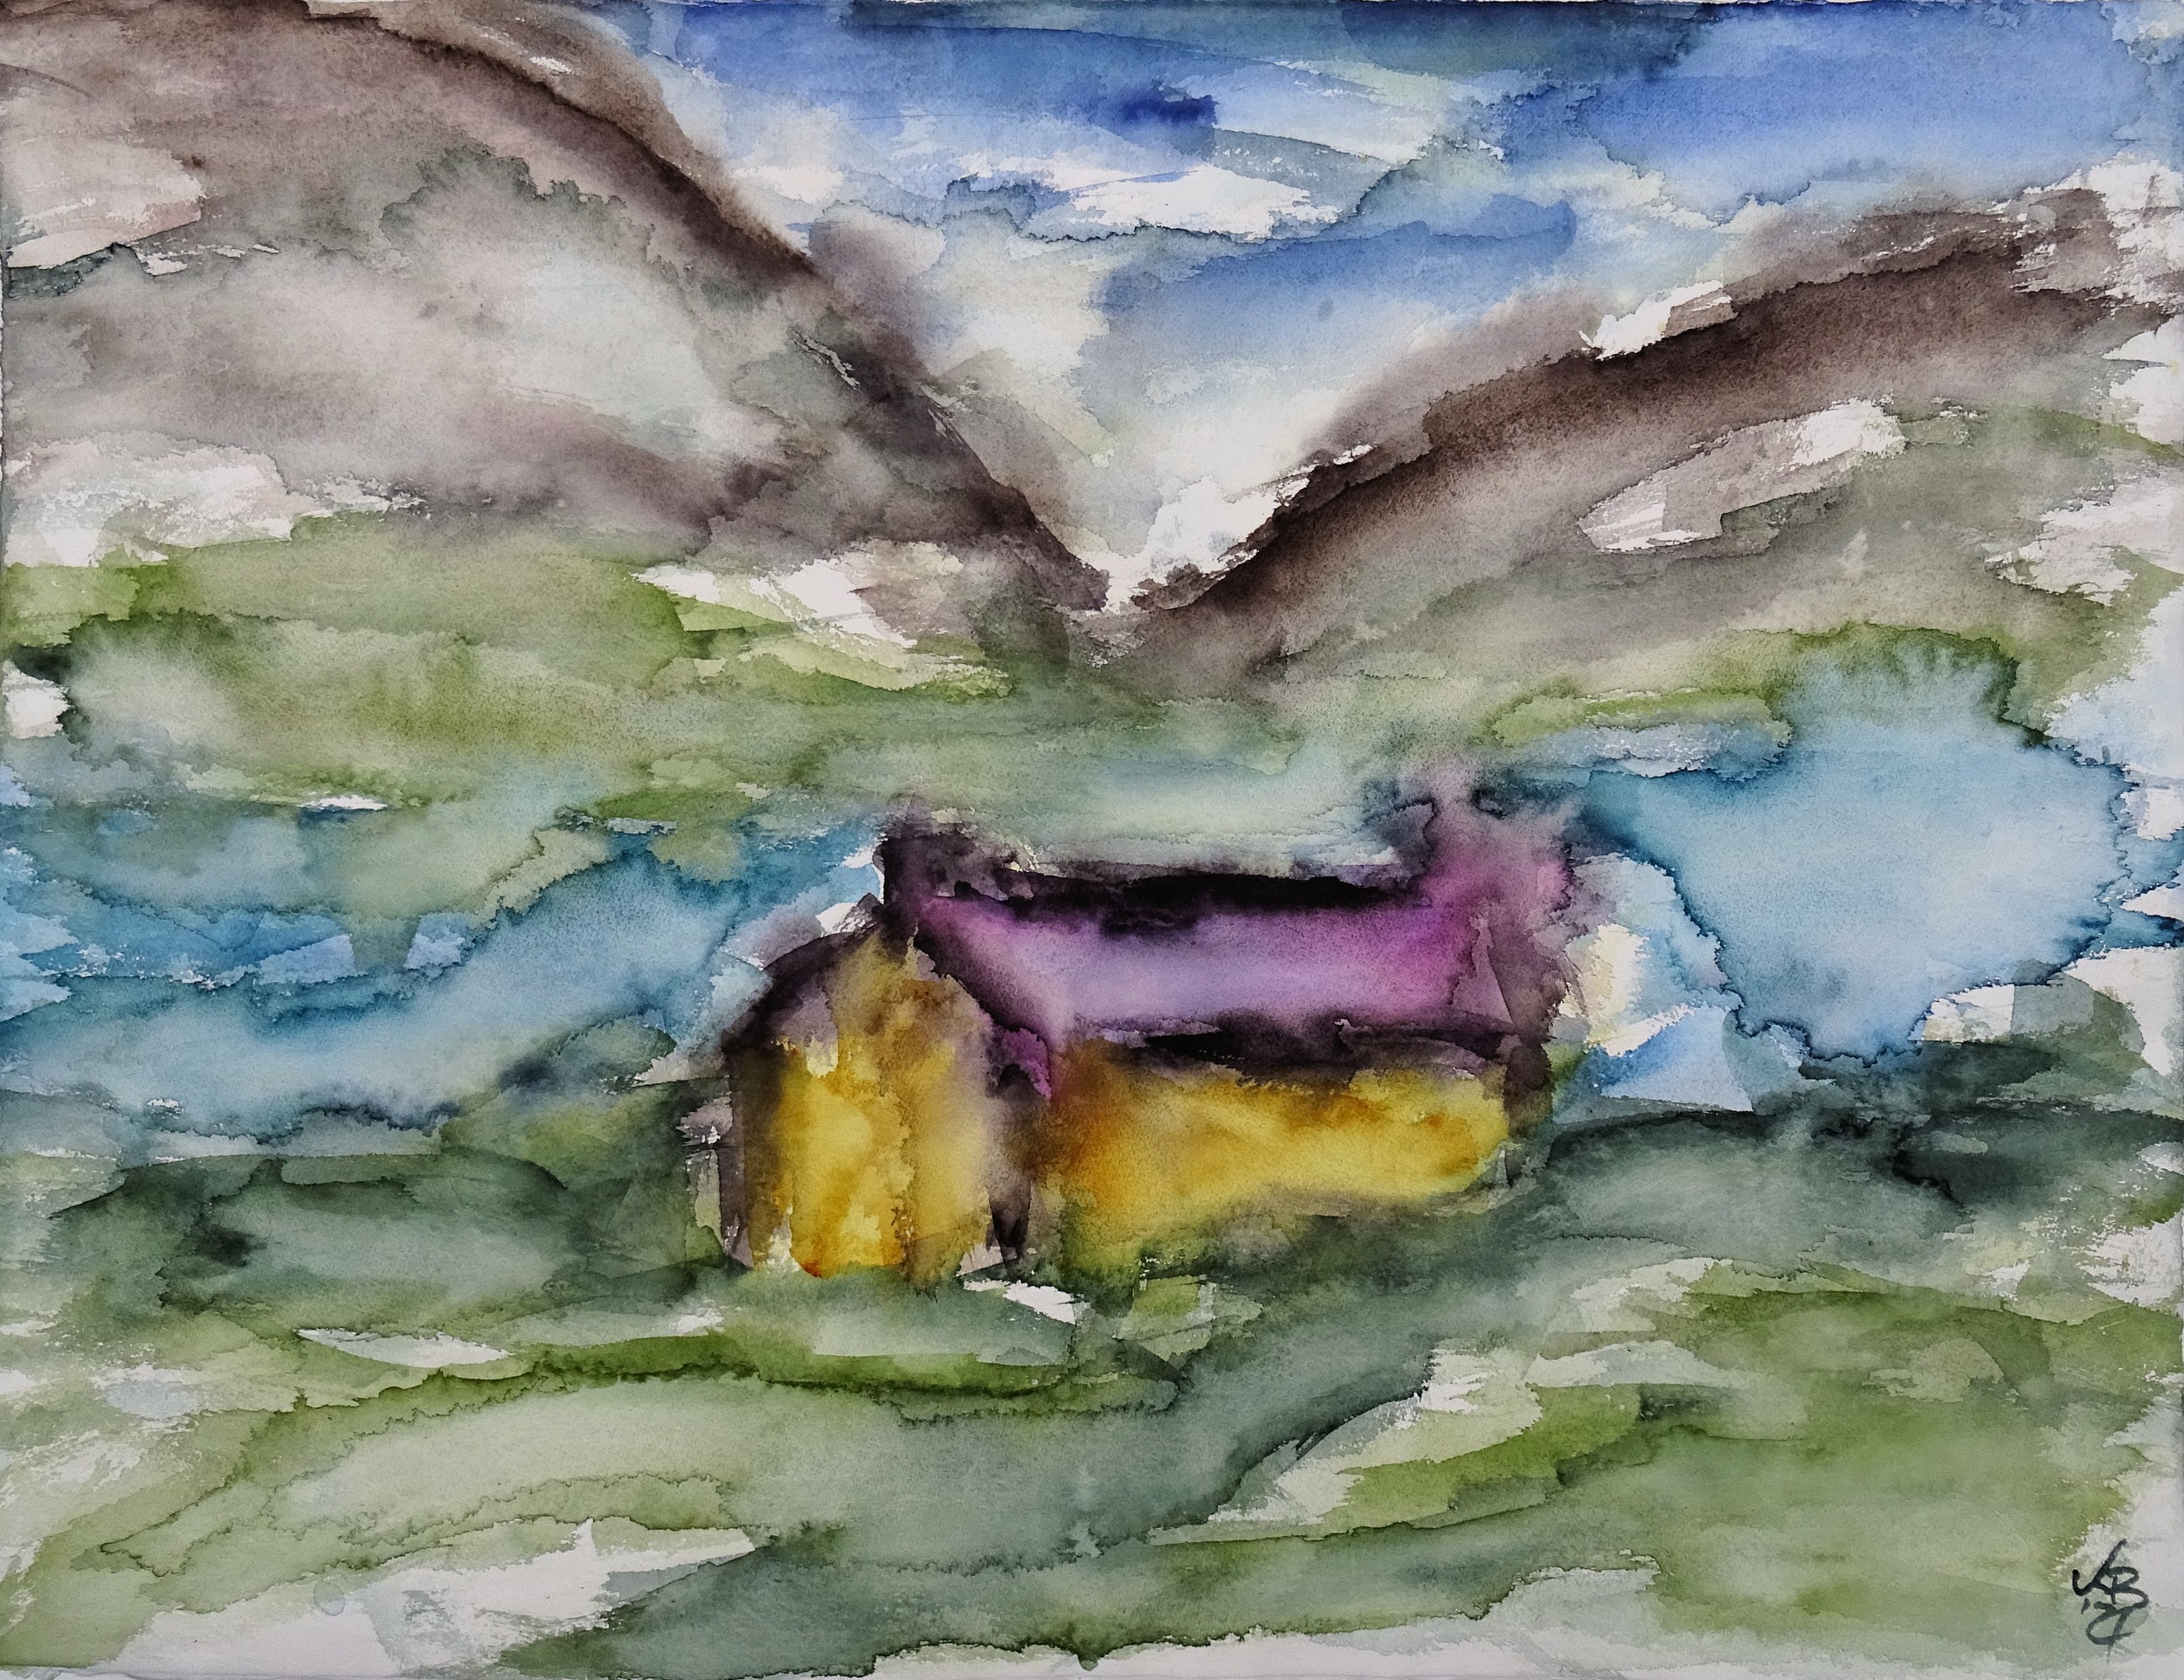 Longing for Orkney - Bothy, Graemsay, Watercolour 65 x 50 cm, © 2021 by Klaus Bölling